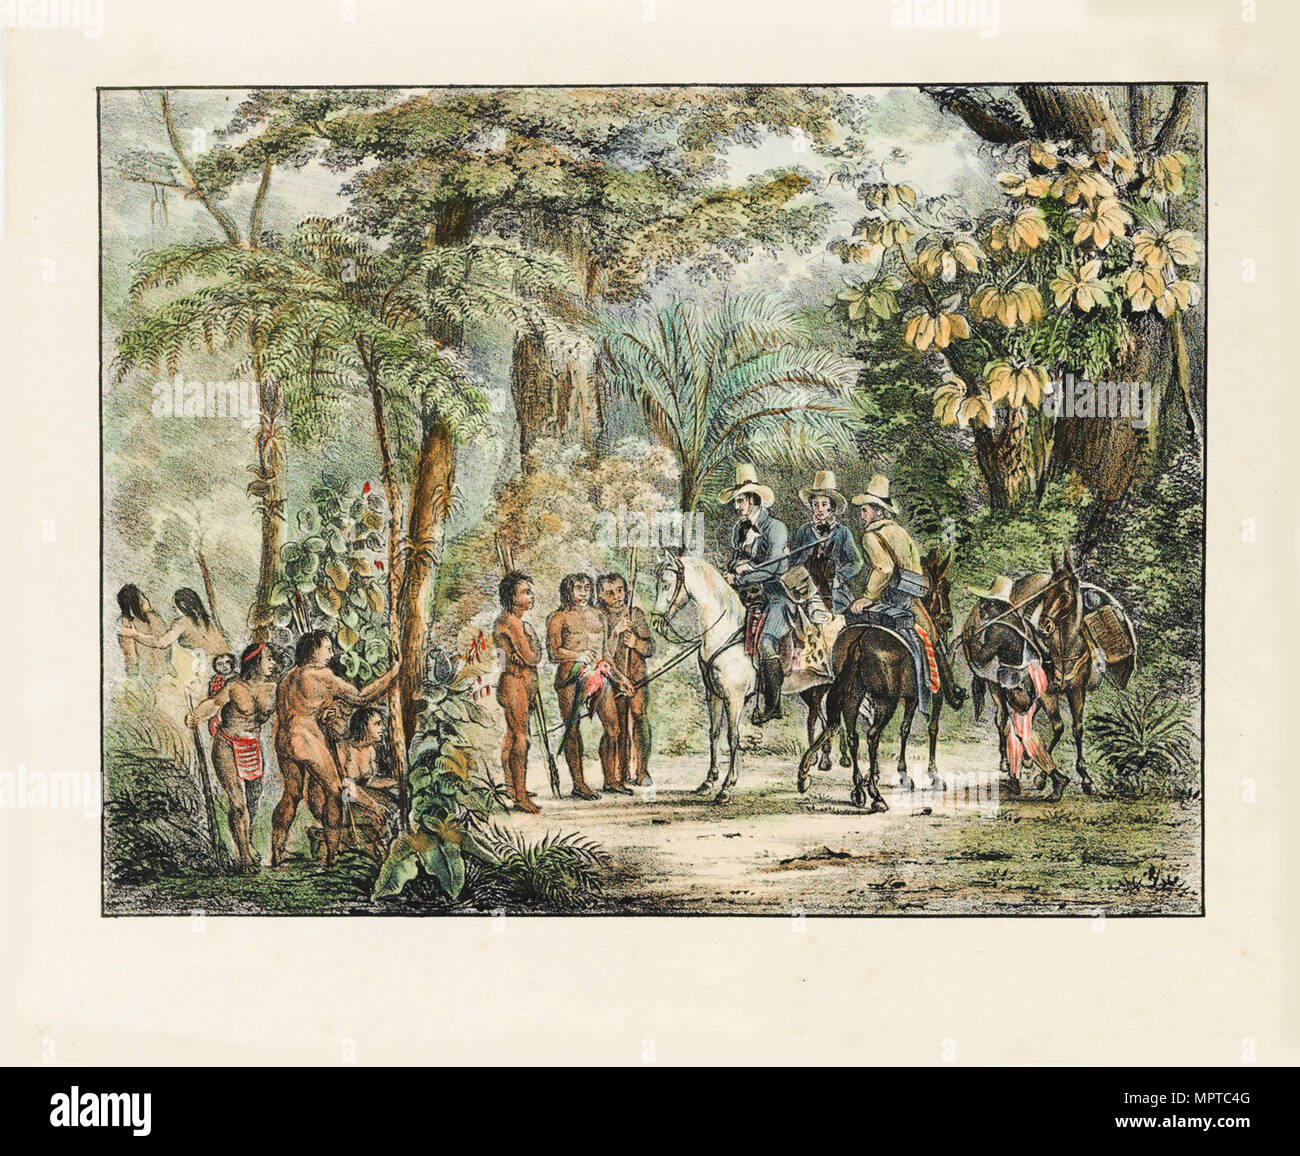 The encounter between the Native Americans and Europeans. From Malerische Reise in Brasilien. Stock Photo